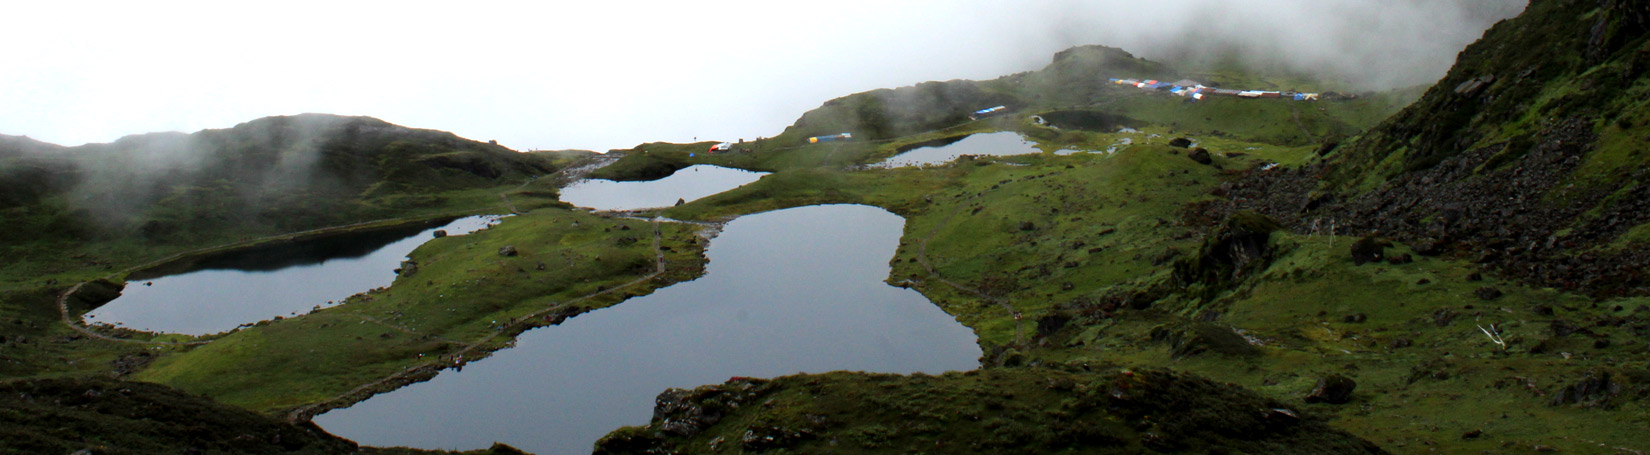 FIVE HOLY LAKES IN PANCH POKHARI